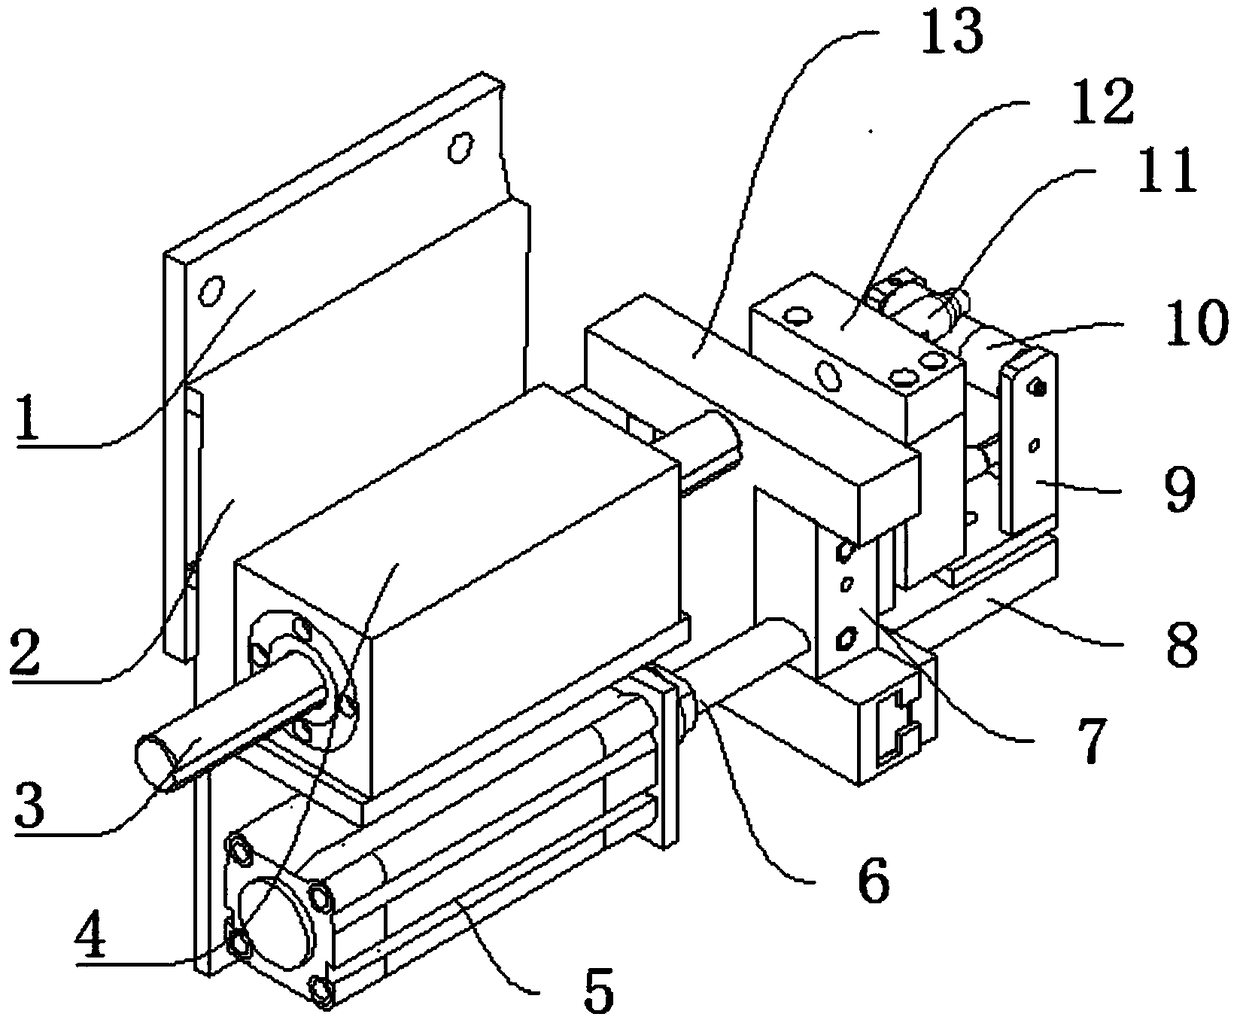 Automatic support structure for rewinder